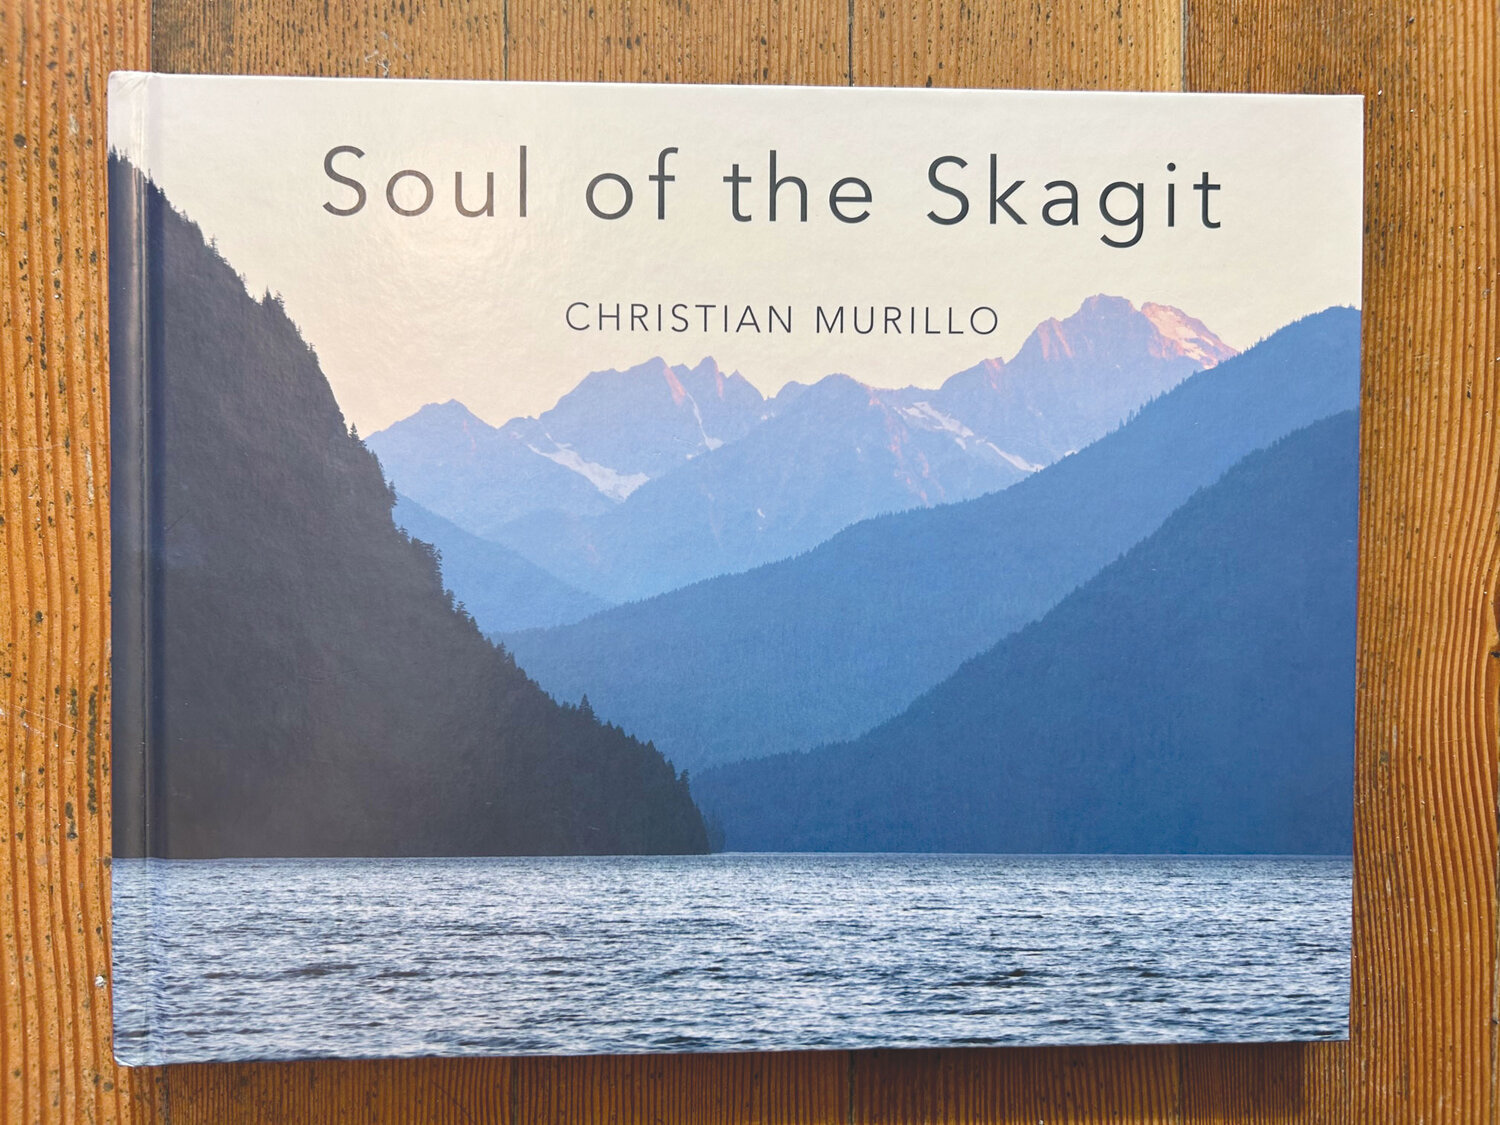 "Soul of the Skagit" by Christian Murillo